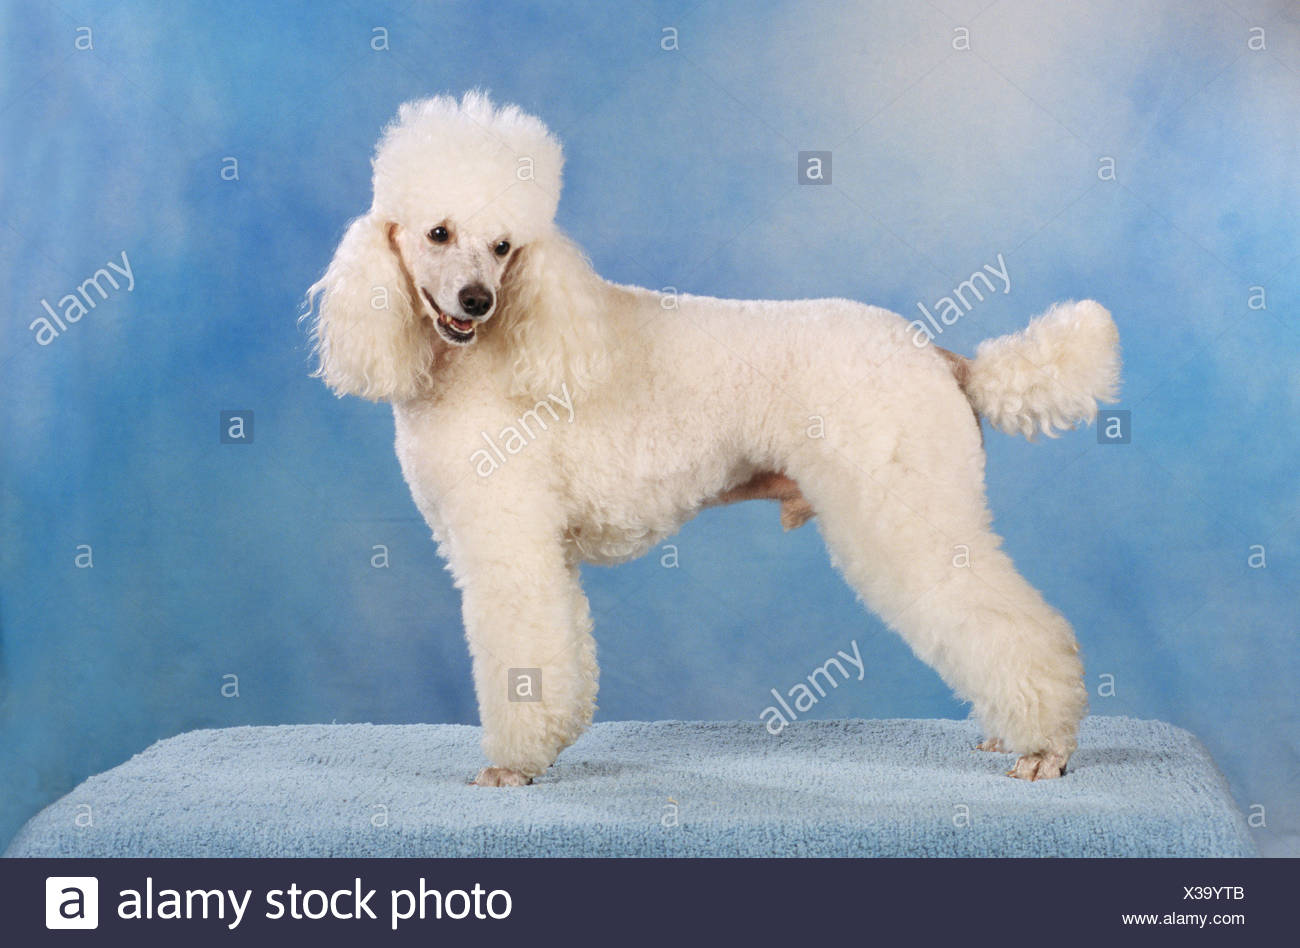 middle poodle